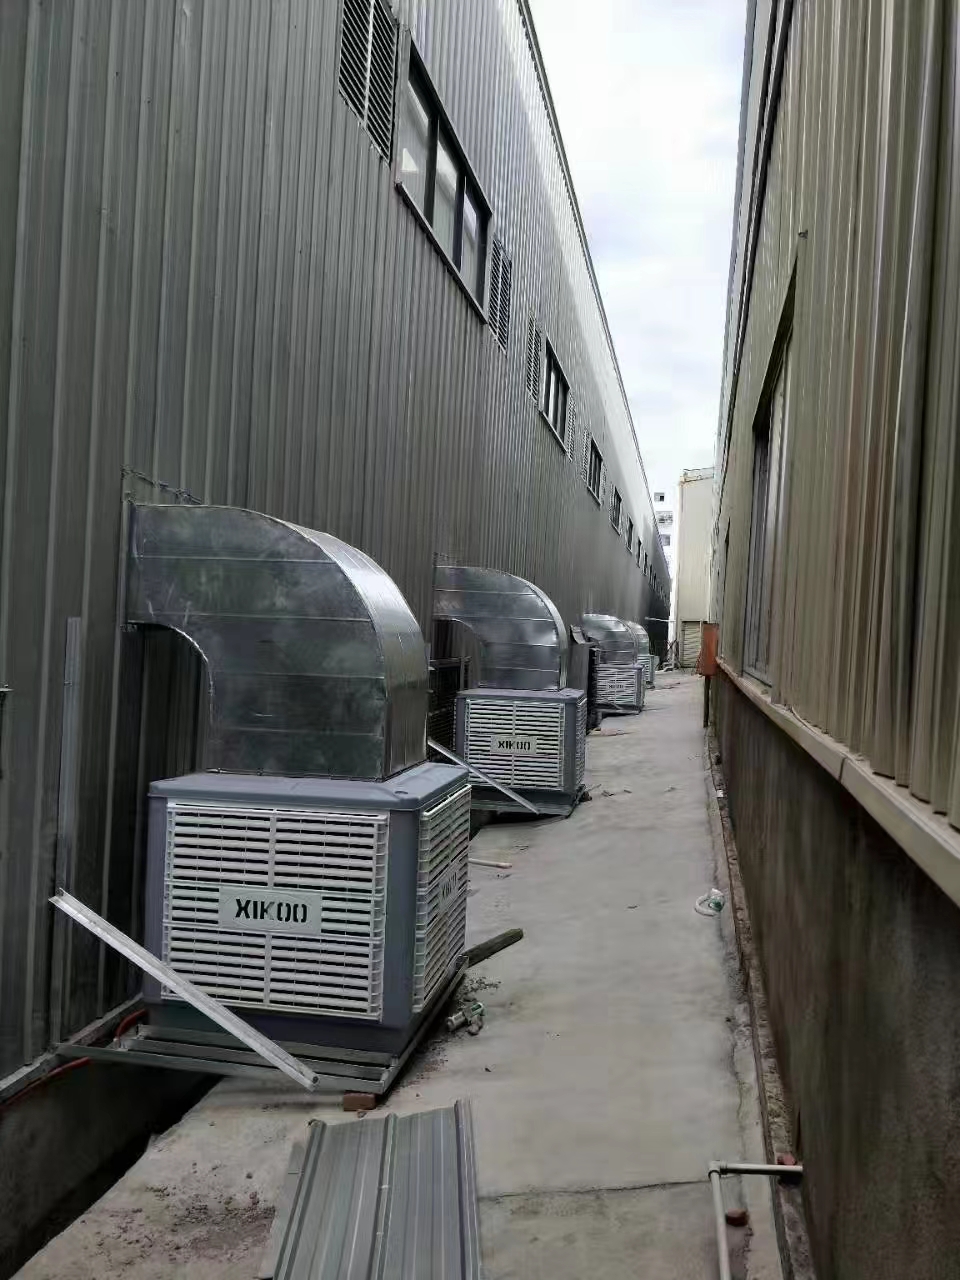 How to equip the air duct for industrial air cooler with an air volume of 18,000?